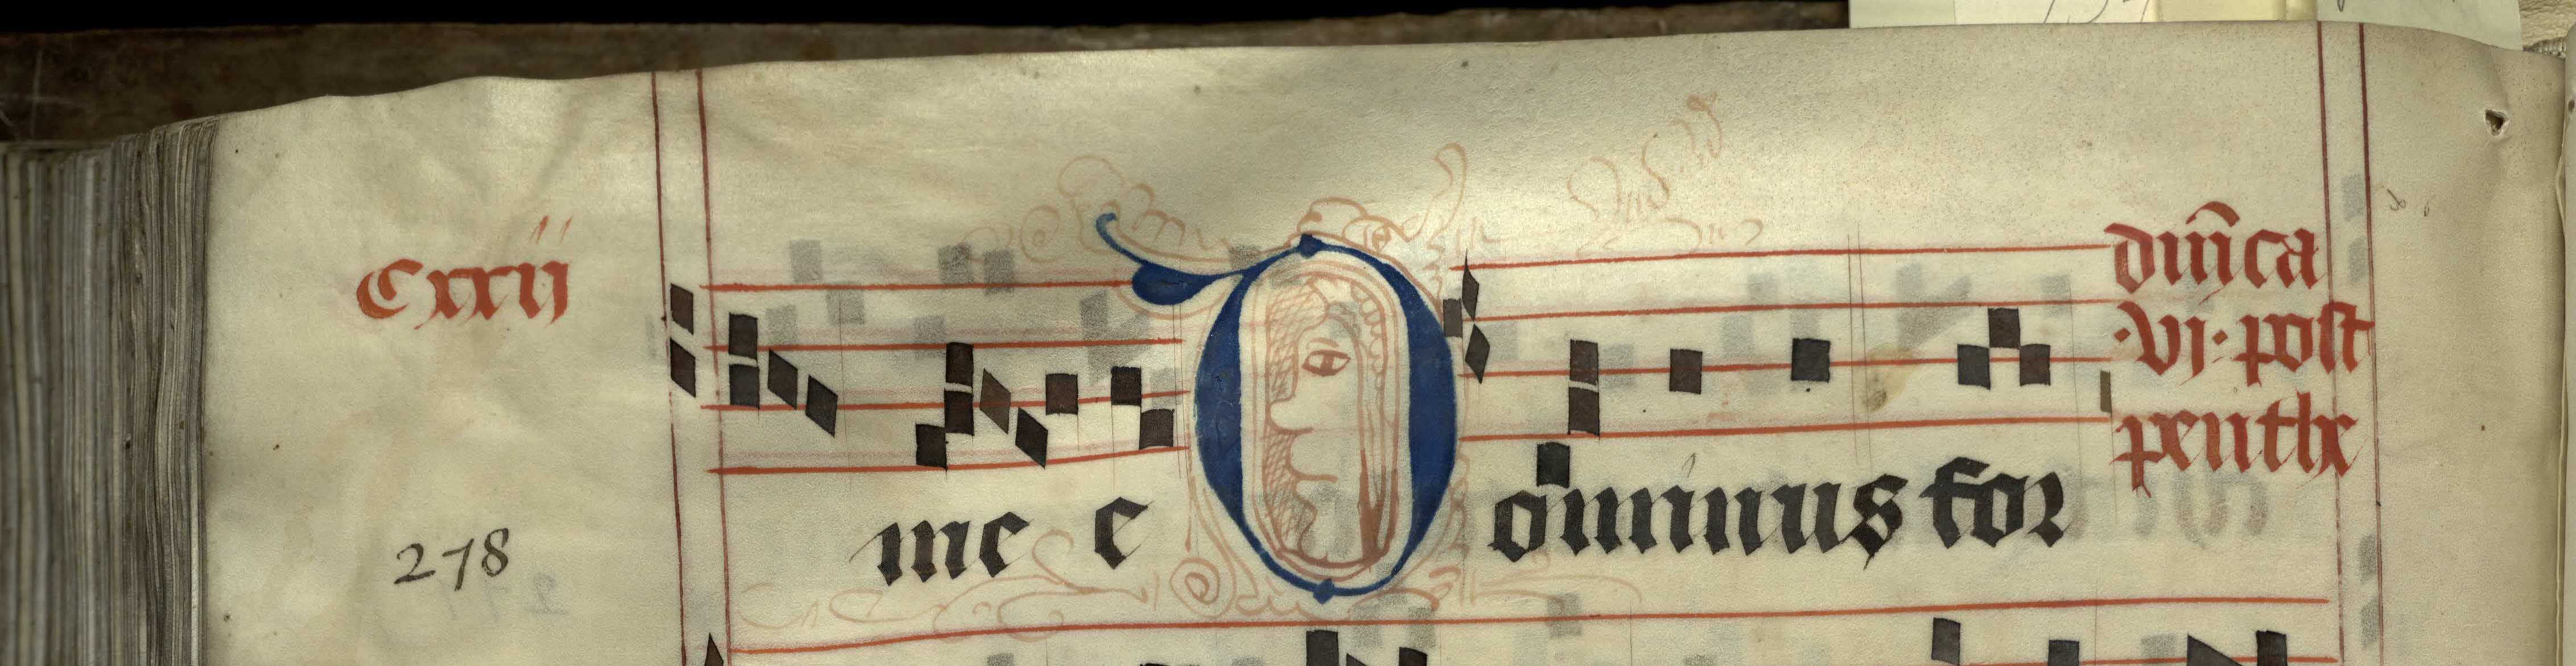 Pen decorated initial 'D' with face from p. 278 of a 15th century Gradual (St Andrews msM2148.G7)